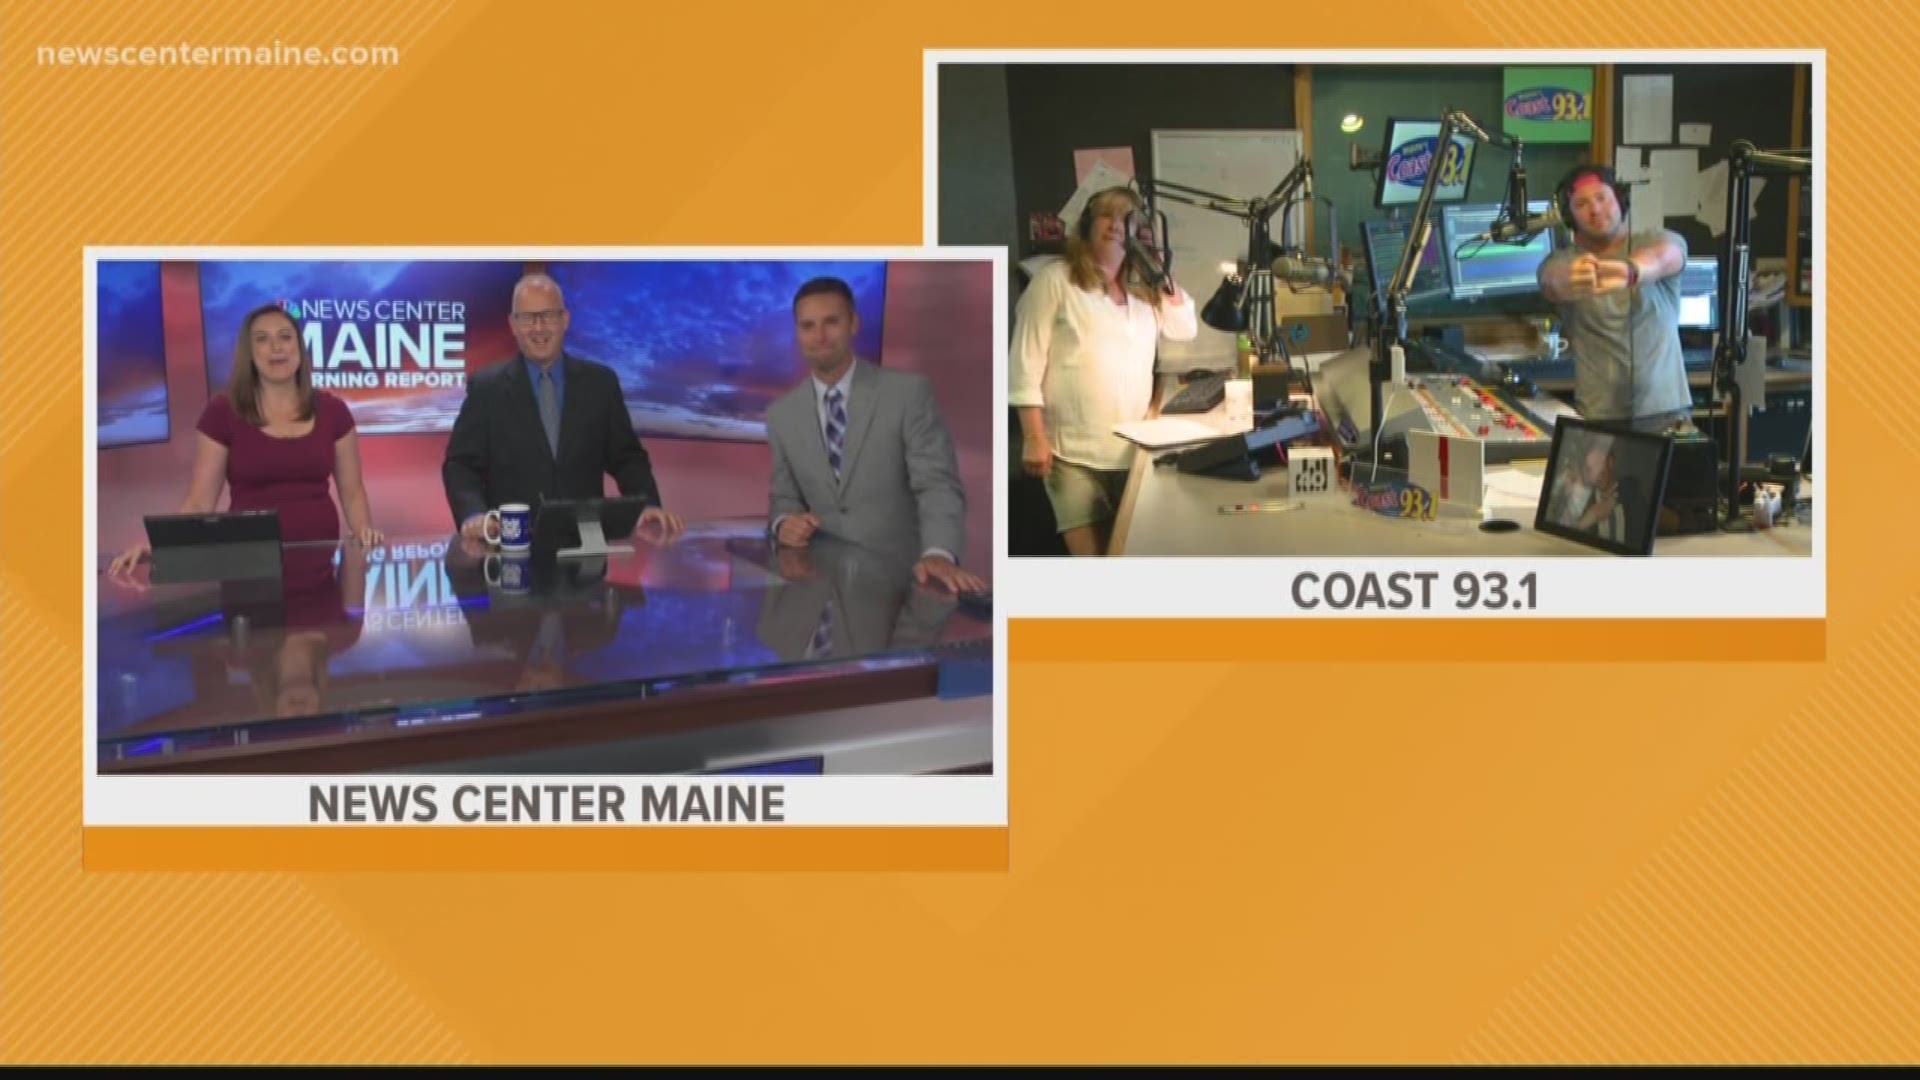 News Center names that tune with the Coast 93.1's Blake and Eva.